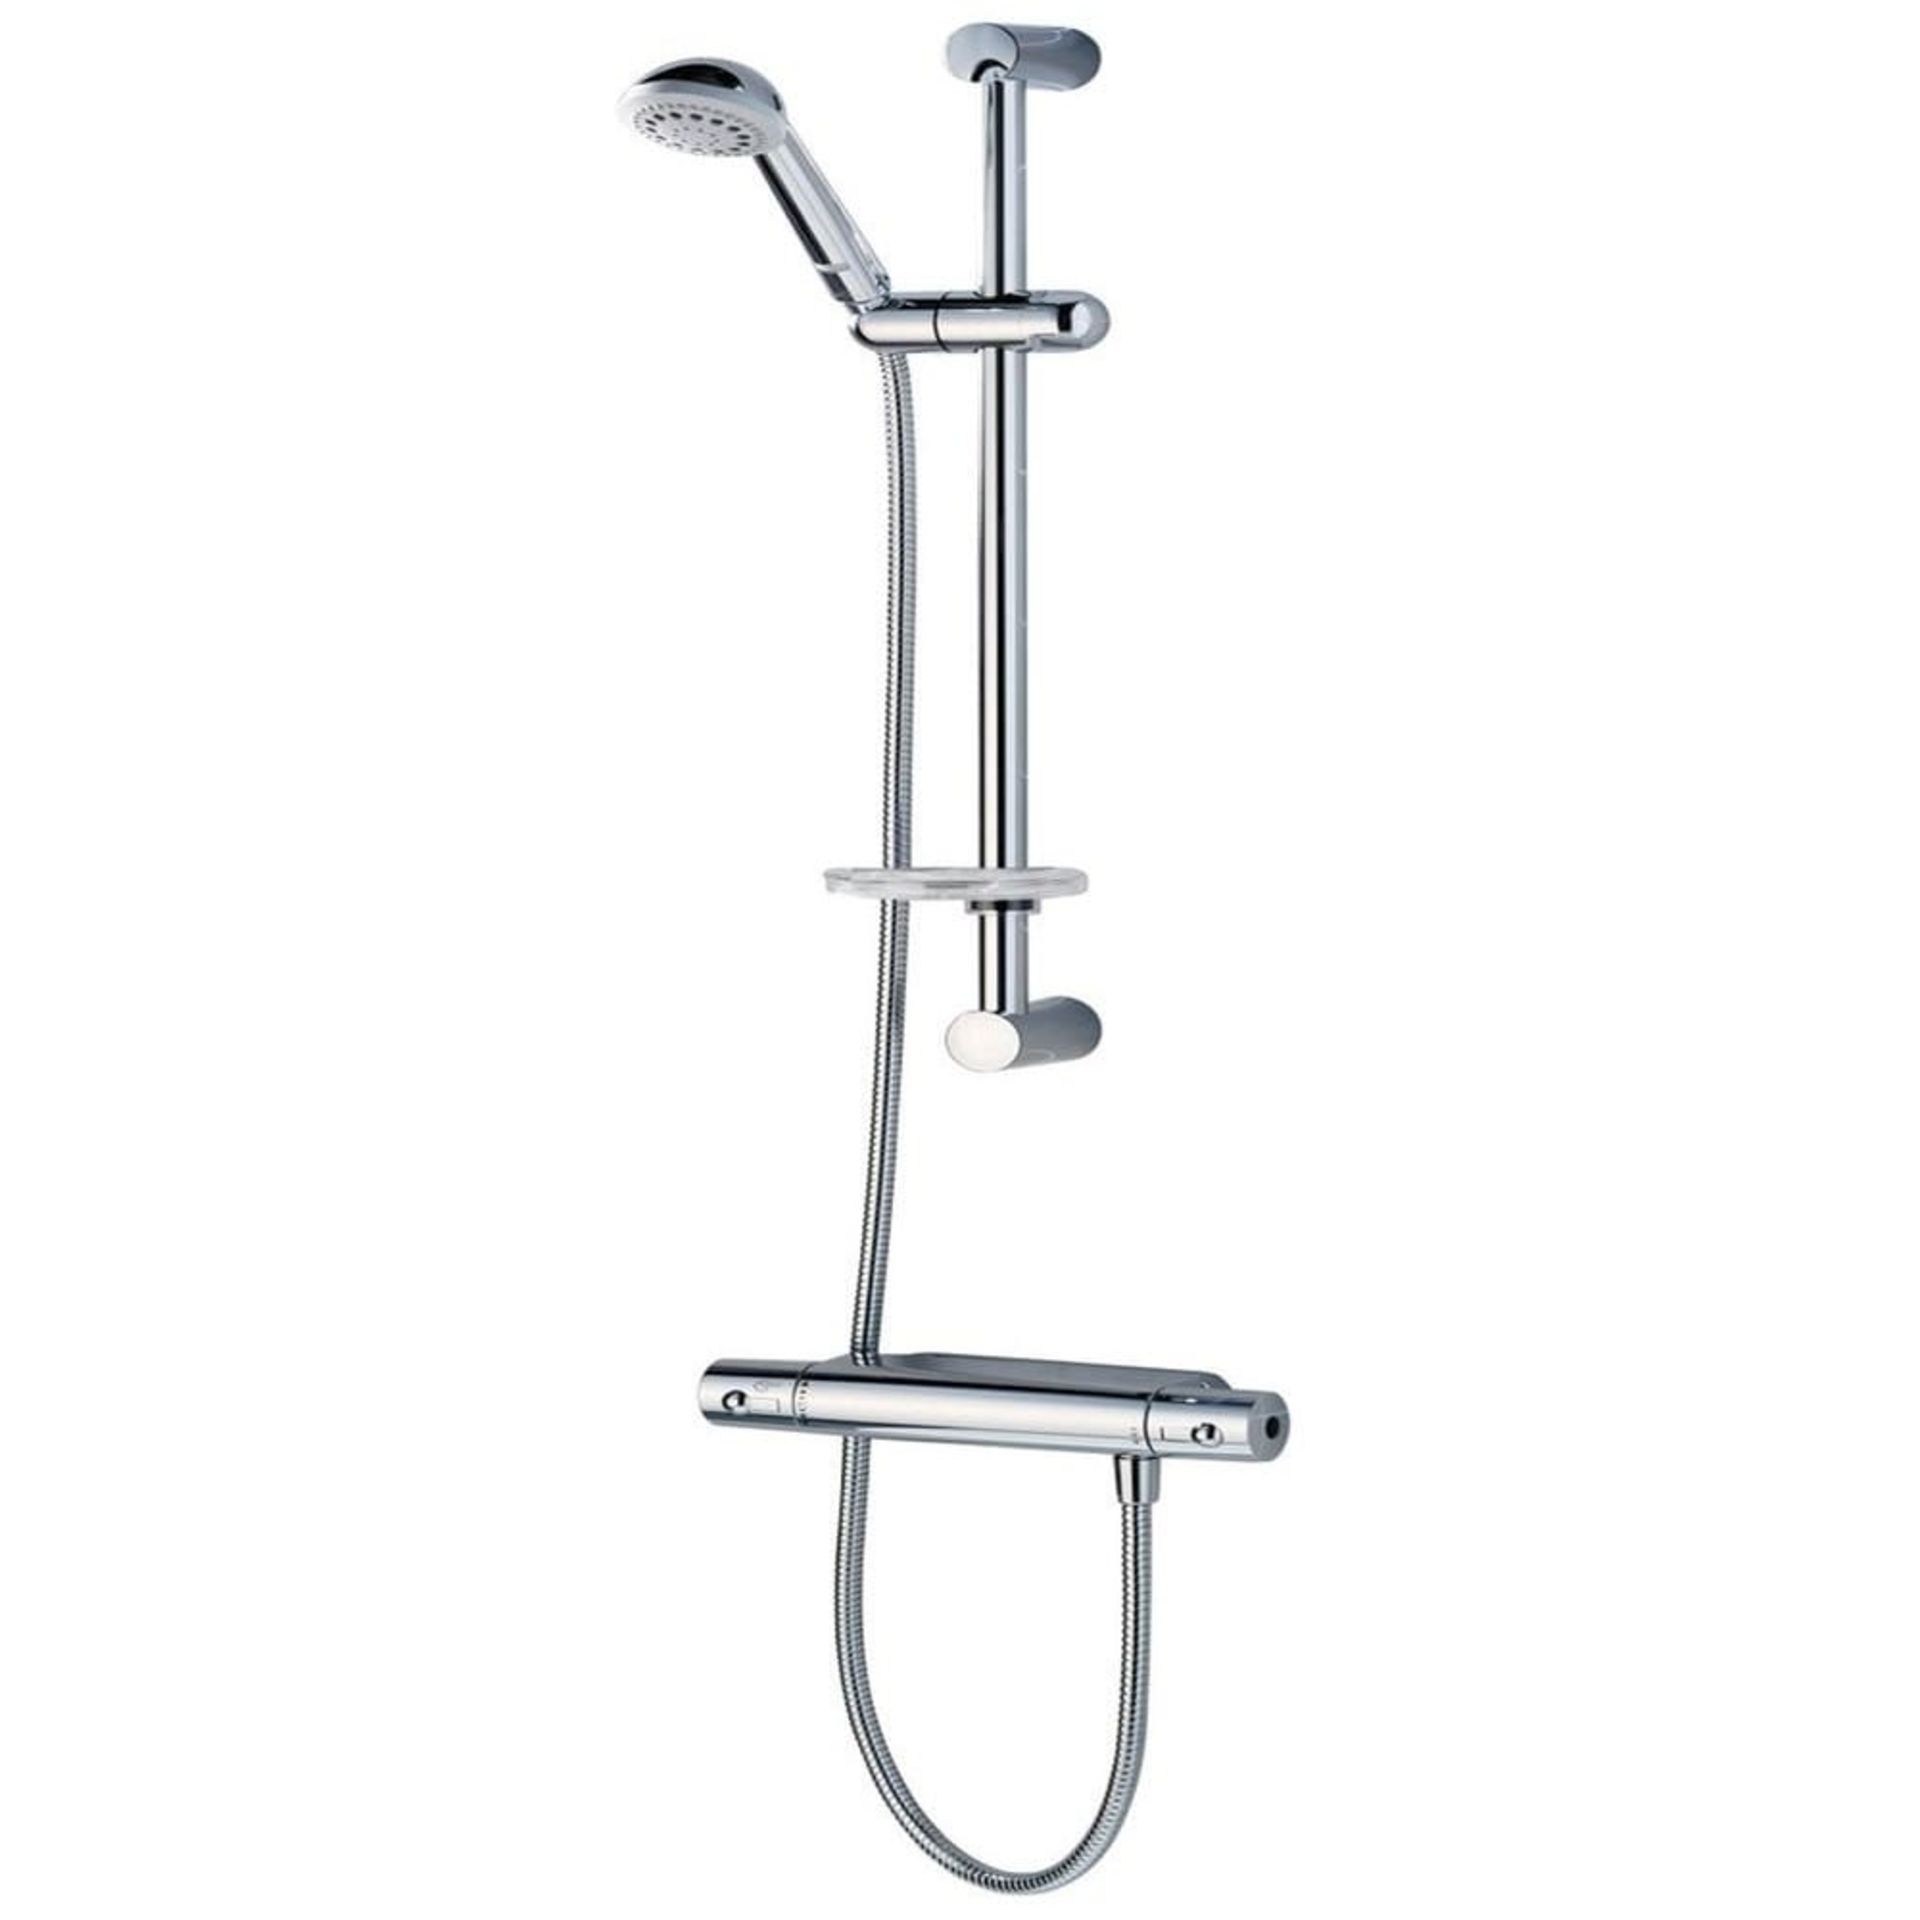 ZZ-IS-A4741AA - Ideal Standard Alto Ecotherm Thermostatic Exposed Shower Pack - Chrome. ...